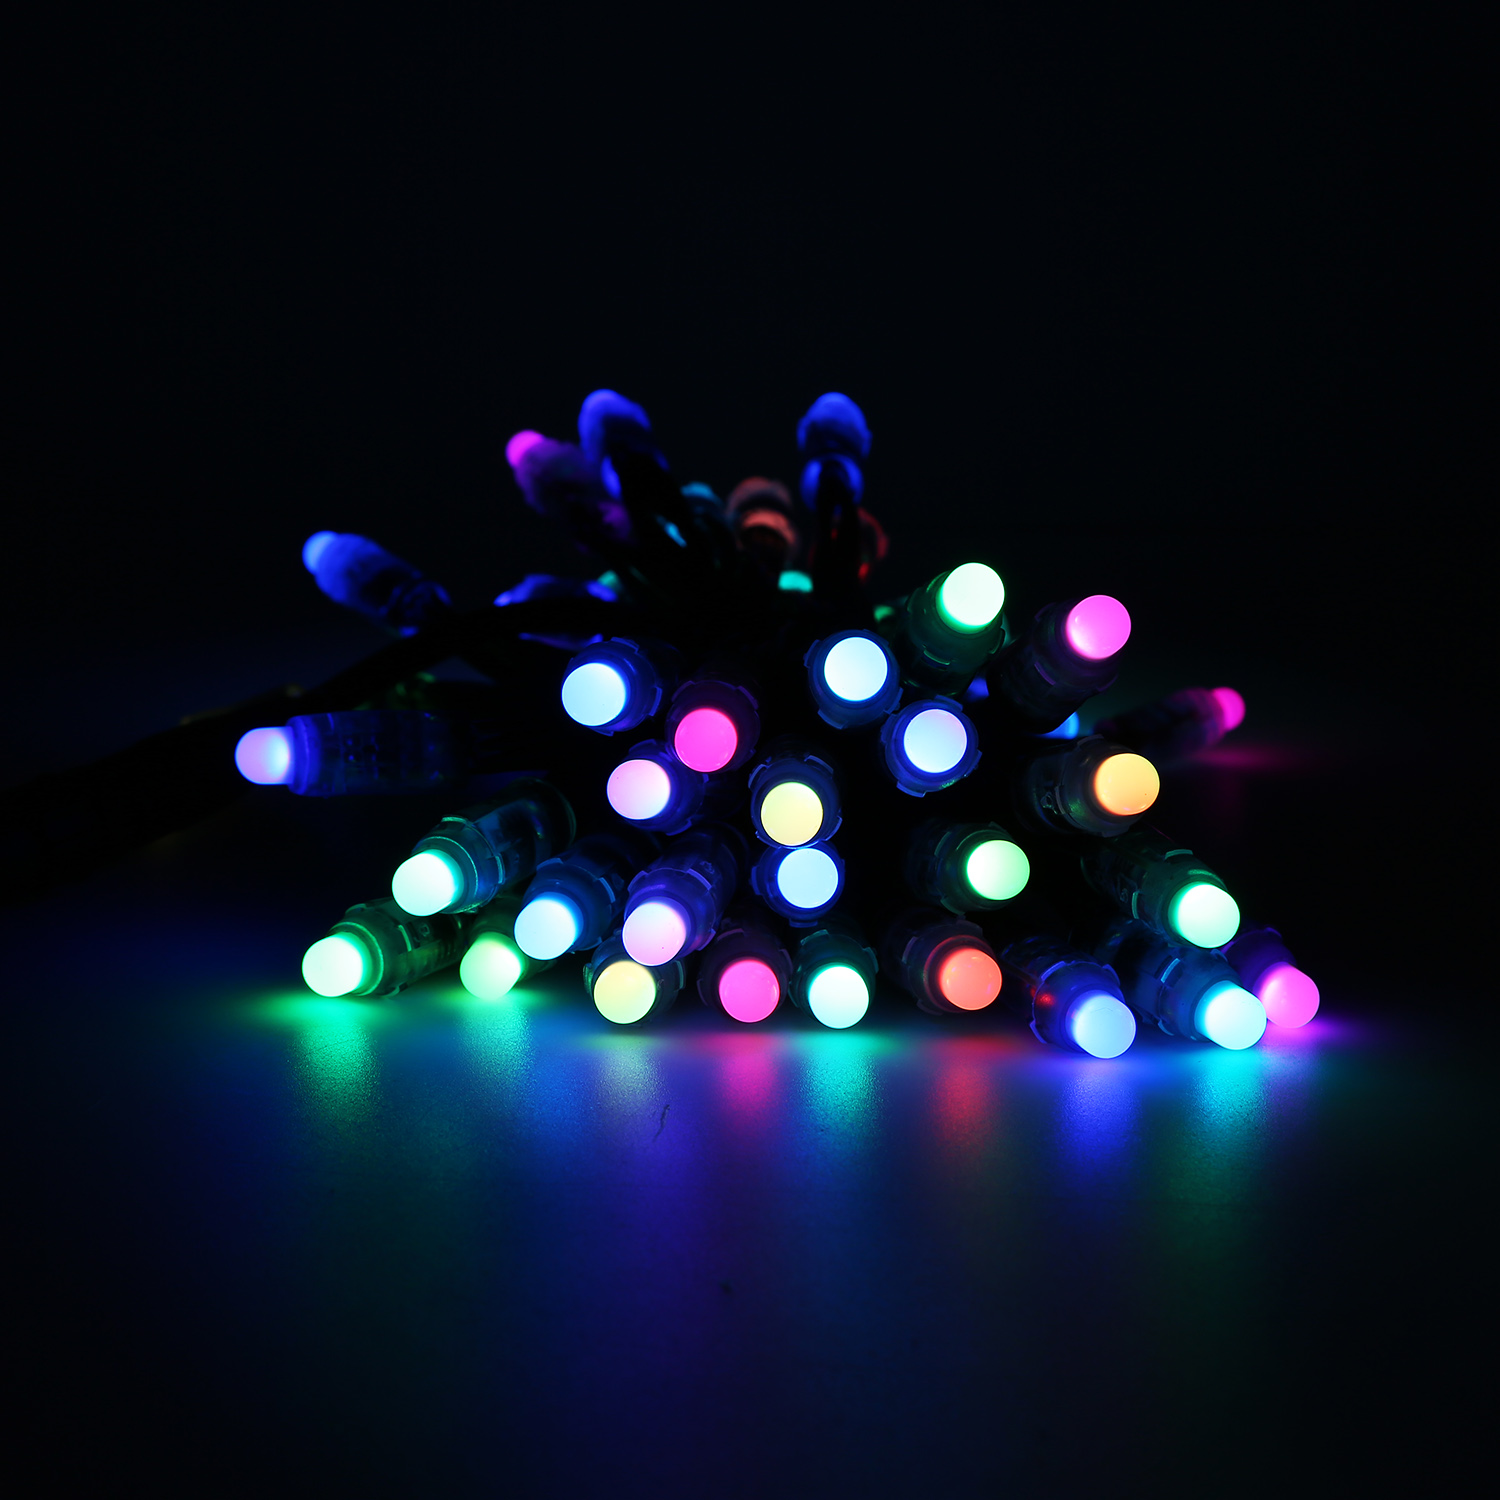 What are the characteristics of the RGB LED Pixel Light?